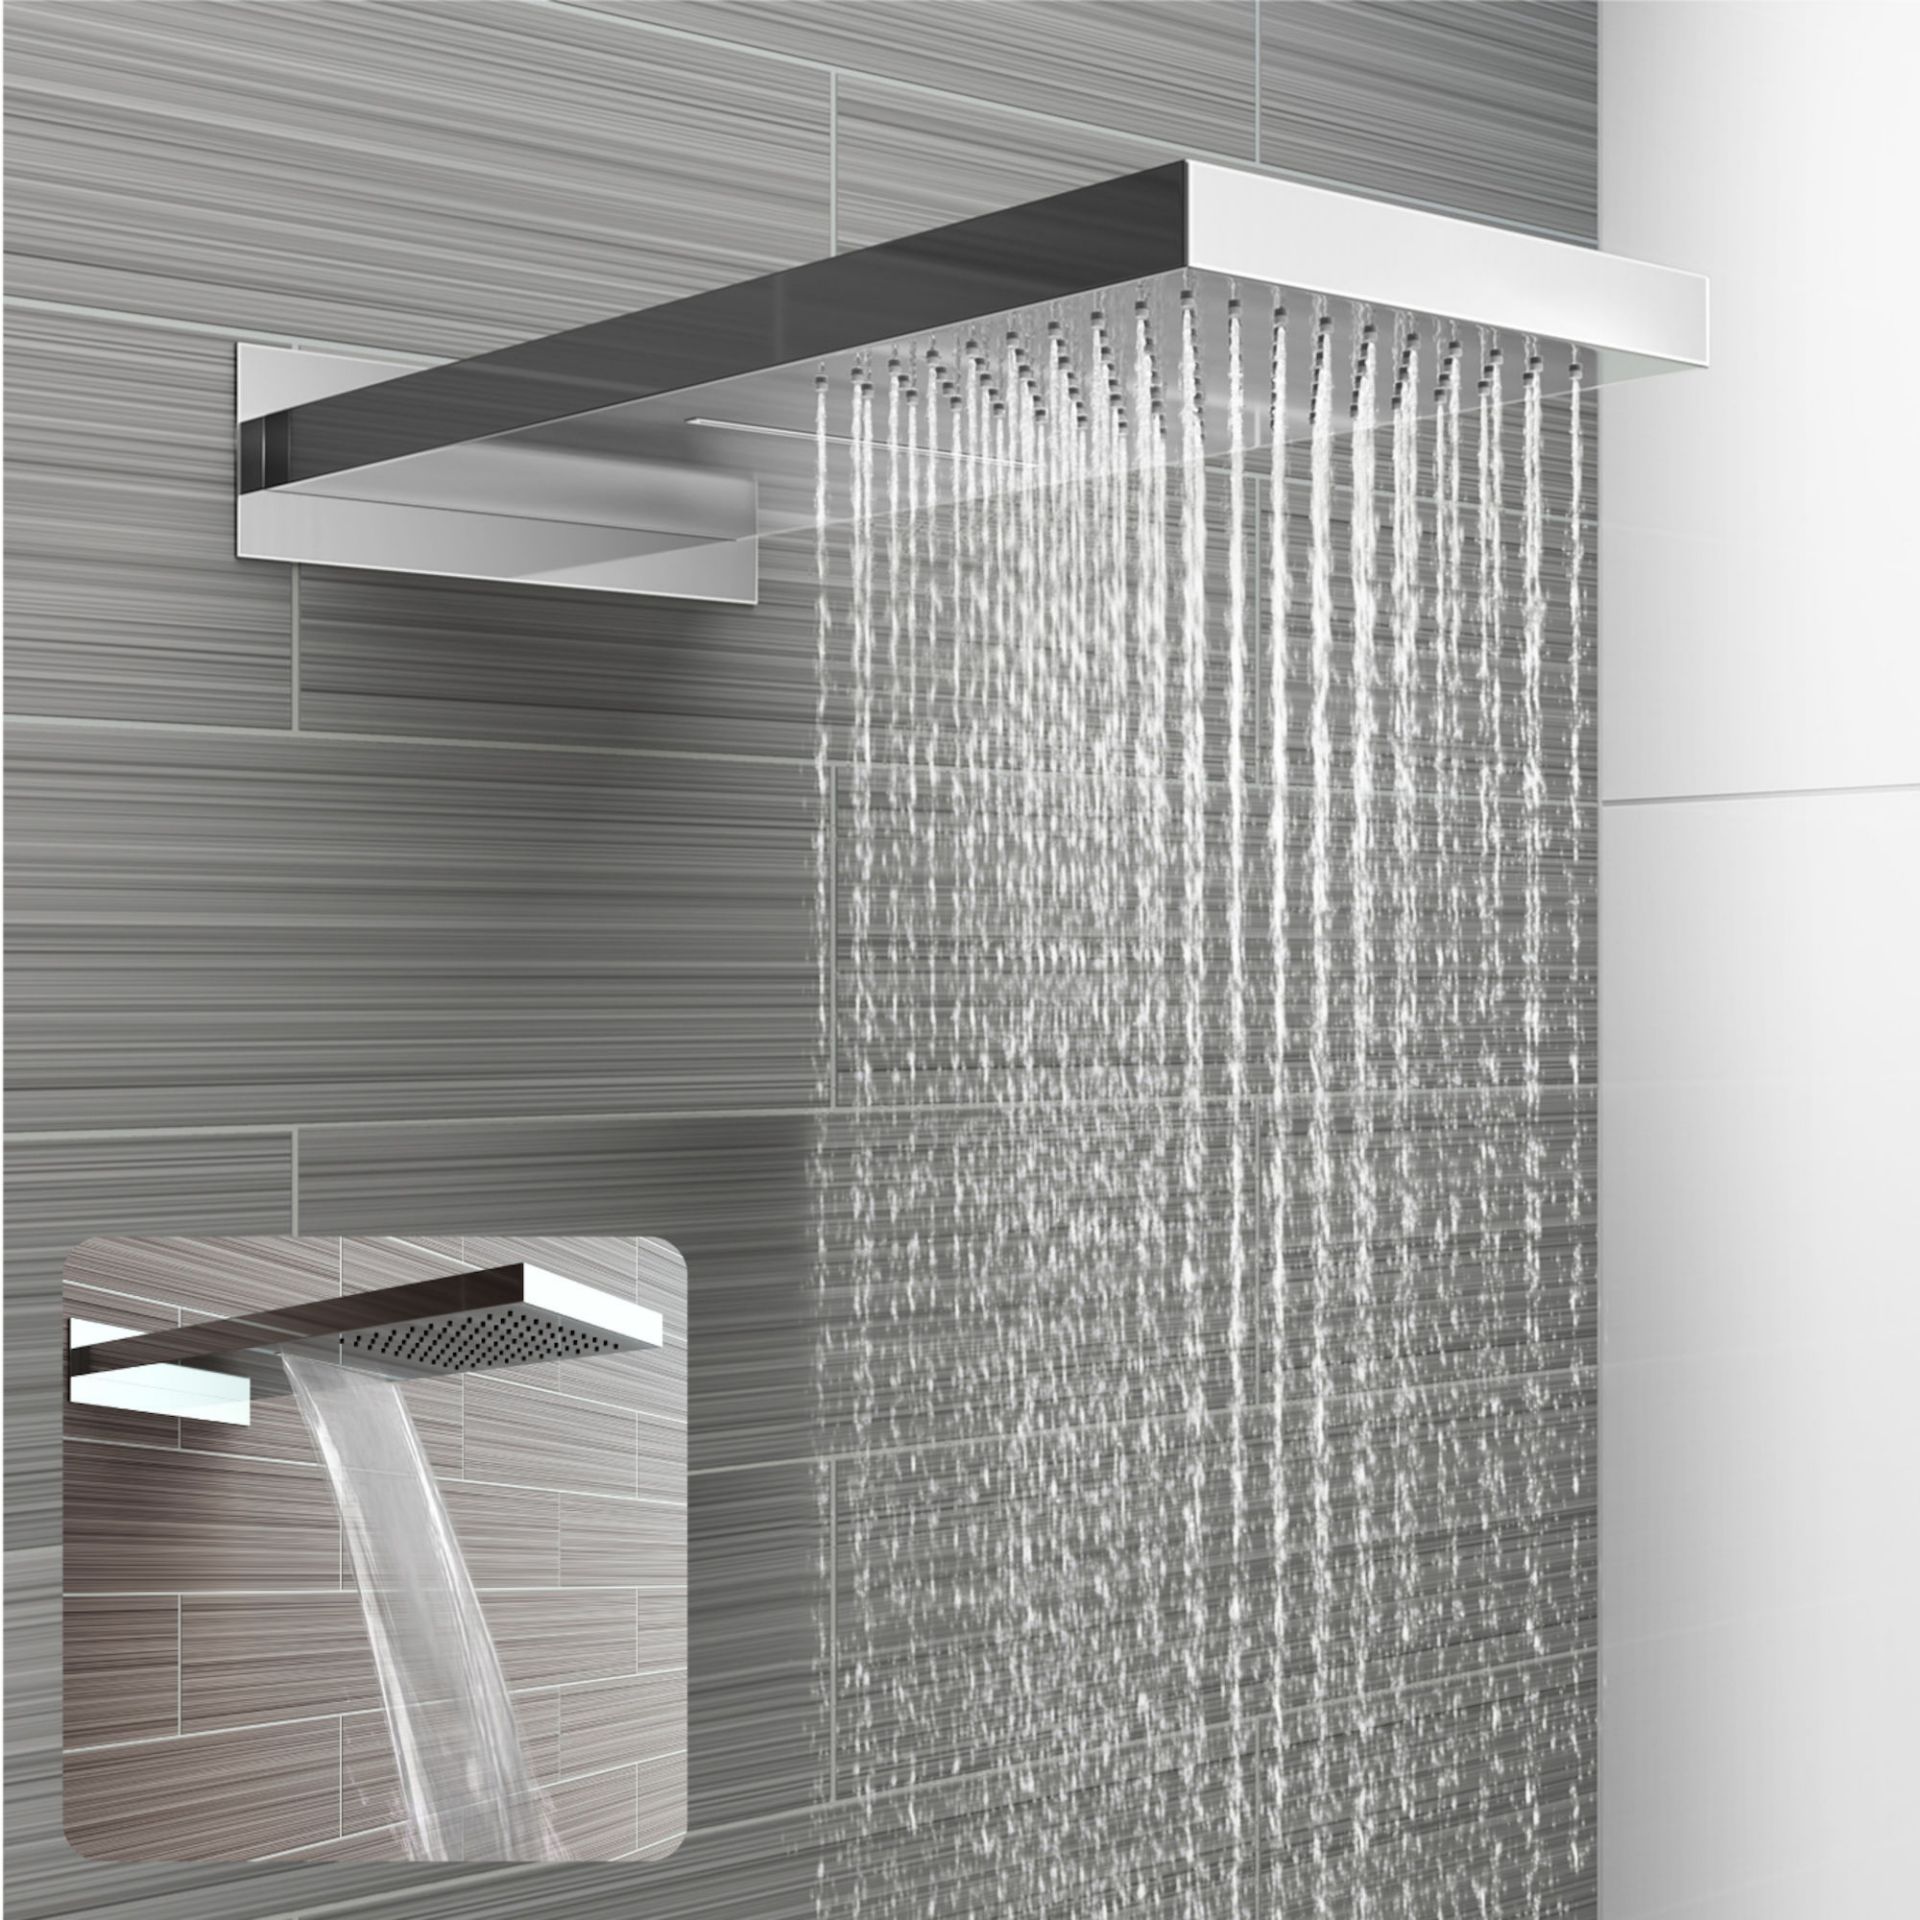 (CT7) 230x500mm Stainless Steel Waterfall Shower Head. RRP £374.98. Dual function waterfall and - Image 3 of 12